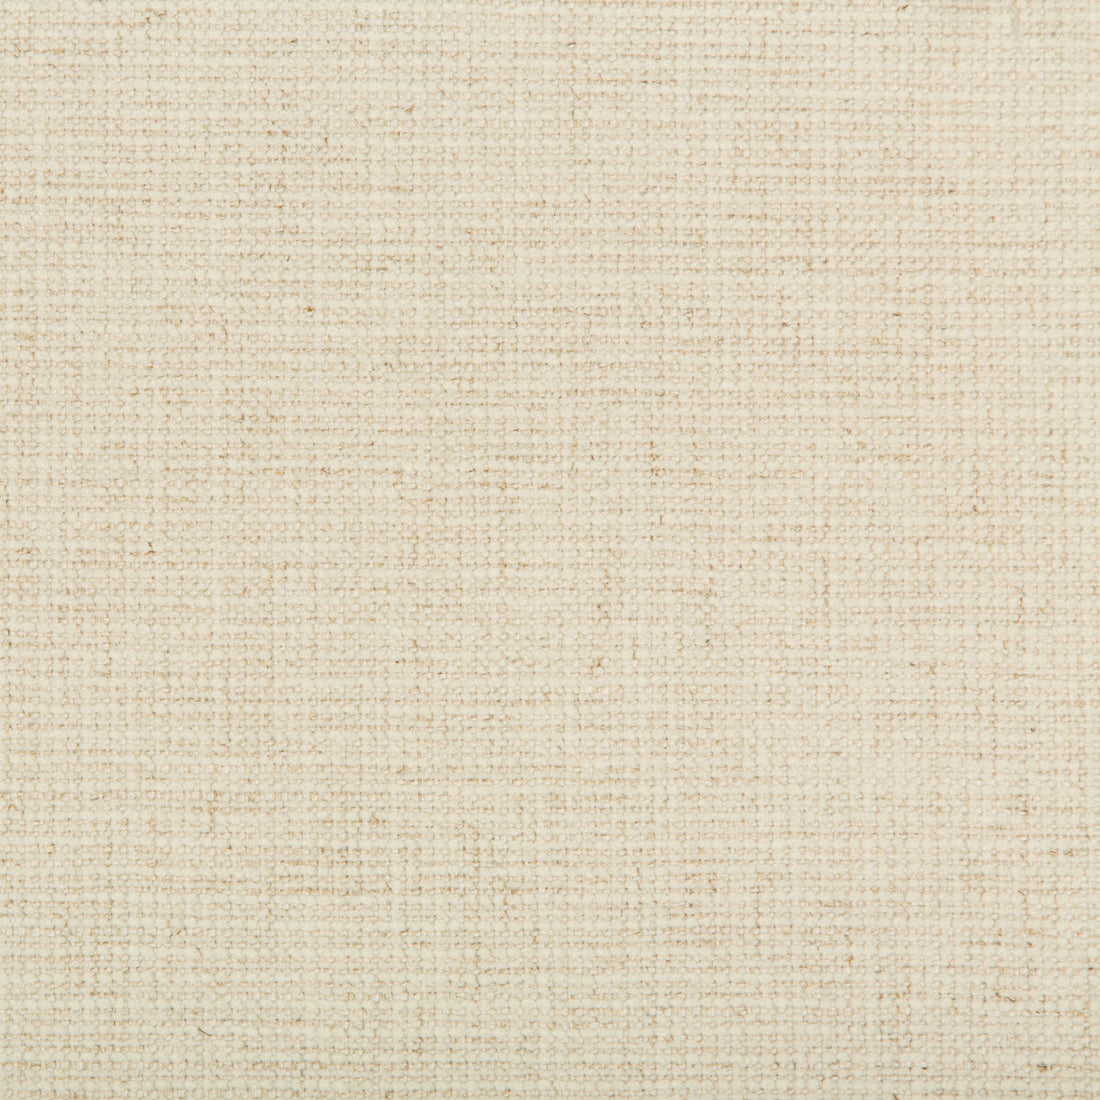 Kravet Smart fabric in 35395-116 color - pattern 35395.116.0 - by Kravet Smart in the Performance Crypton Home collection